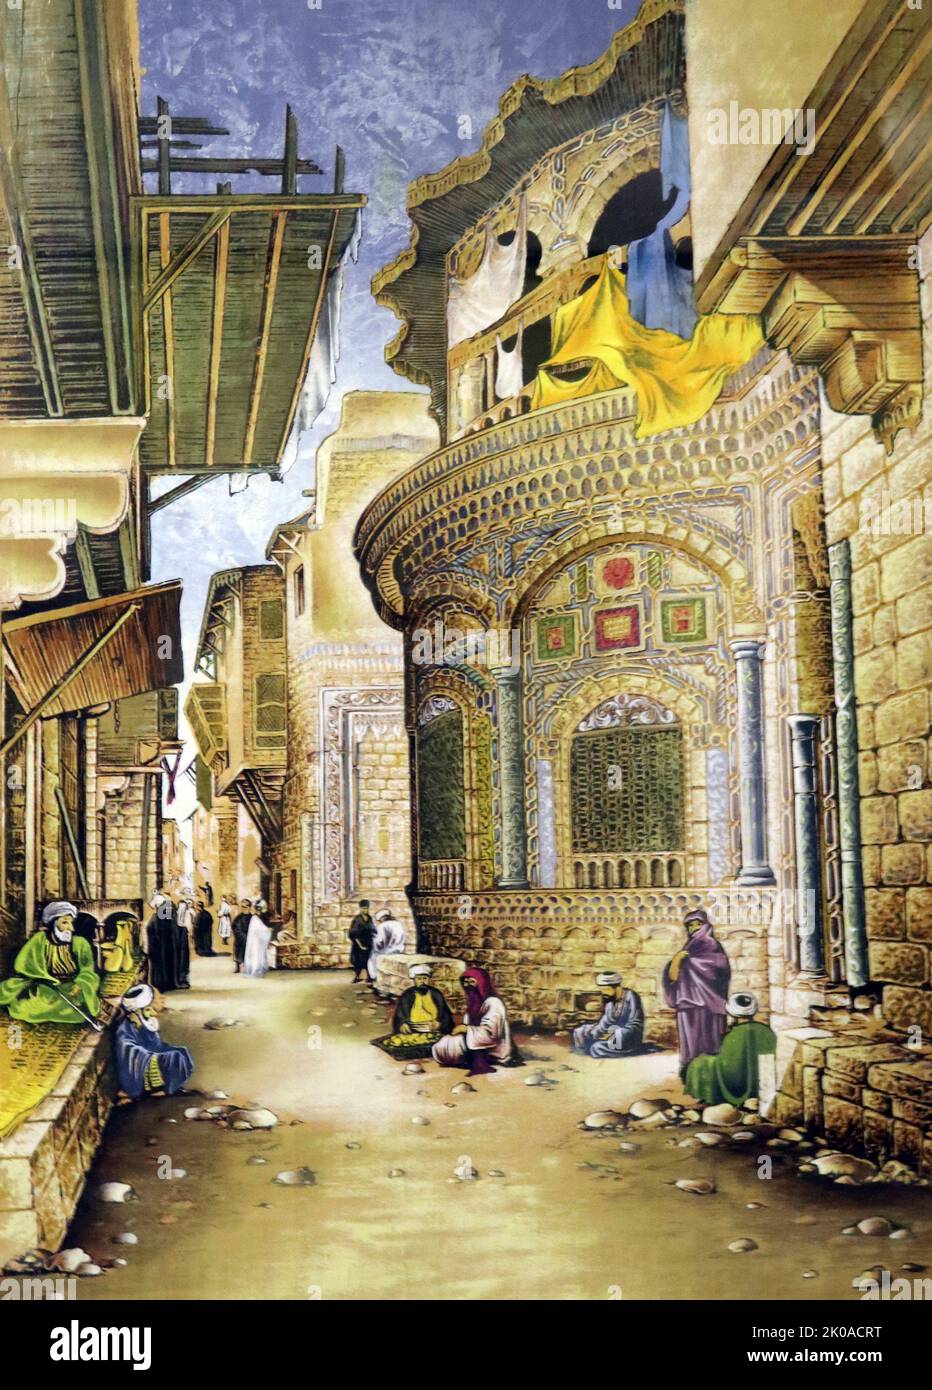 Modern tapestry depicting a 19th century street scene in Cairo, Egypt Stock Photo